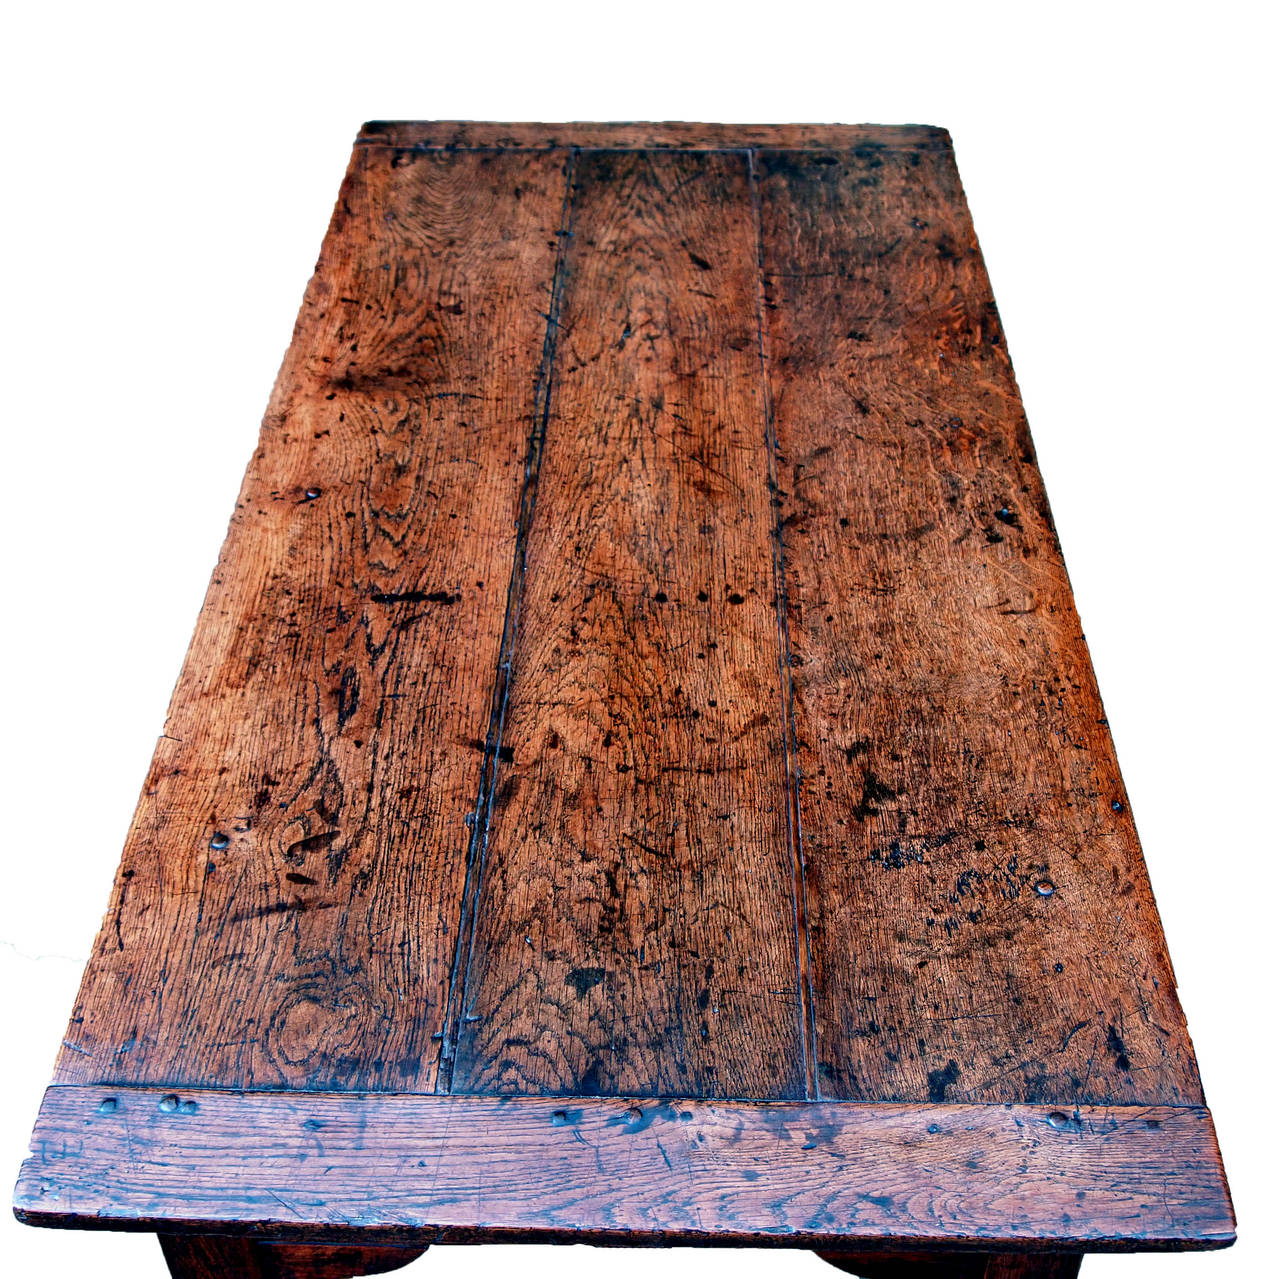 A Delightful Mid 18th Century Oak Dining Table Having Plank Top 
With Cleated Ends Raised On Elegant Turned Legs United By H 
Stretcher Retaining Exceptional Colour And Patina Throughout